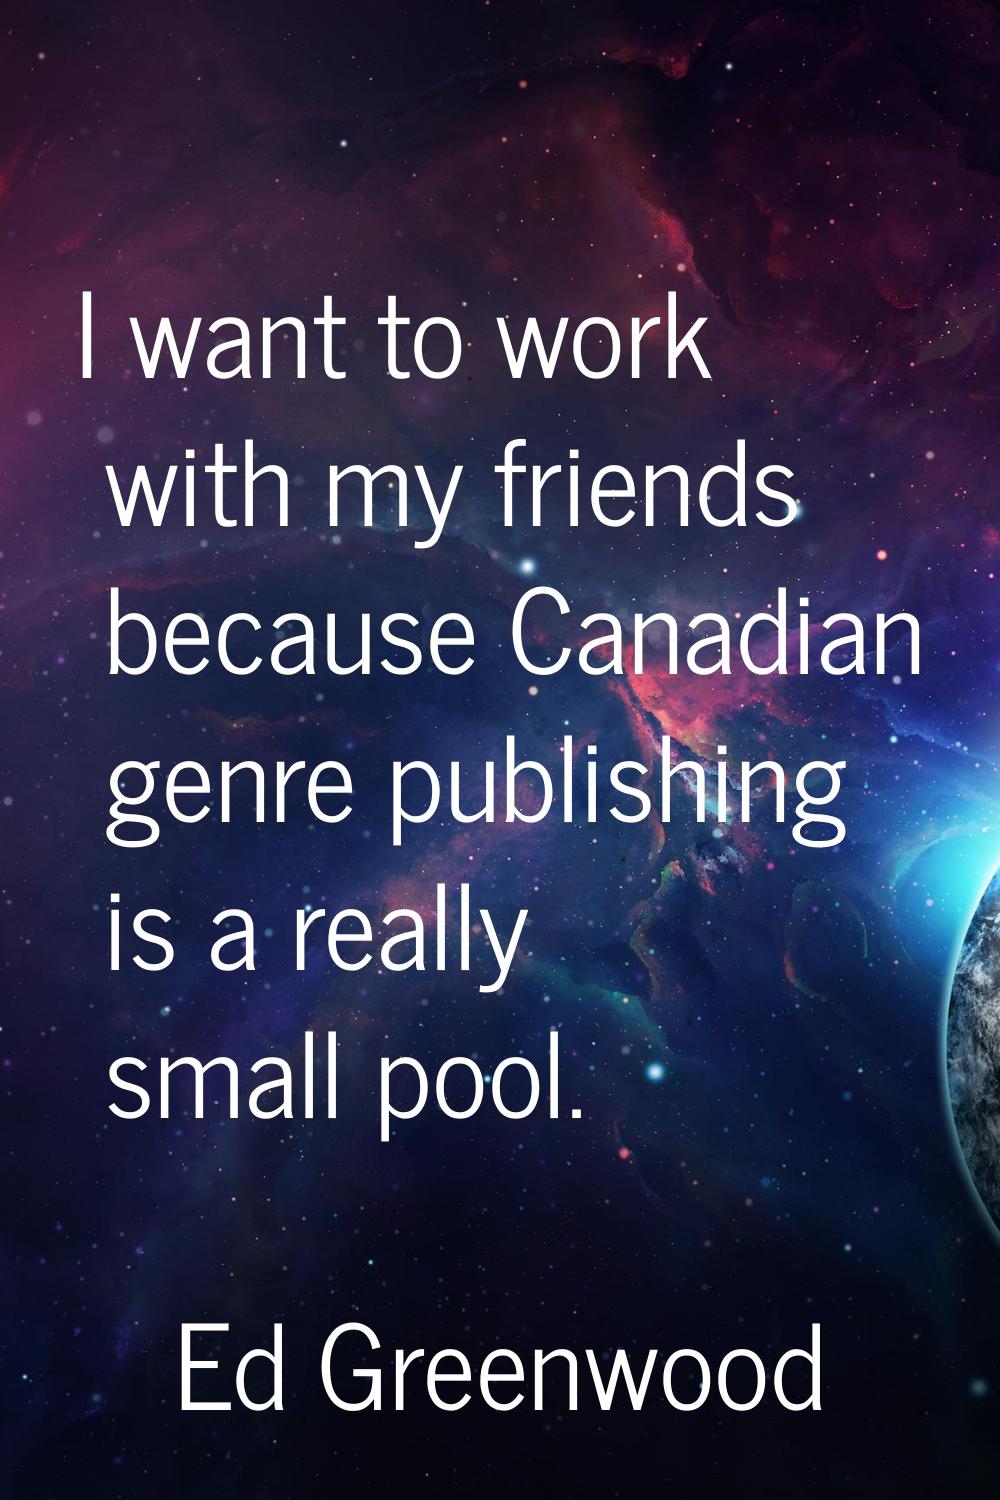 I want to work with my friends because Canadian genre publishing is a really small pool.